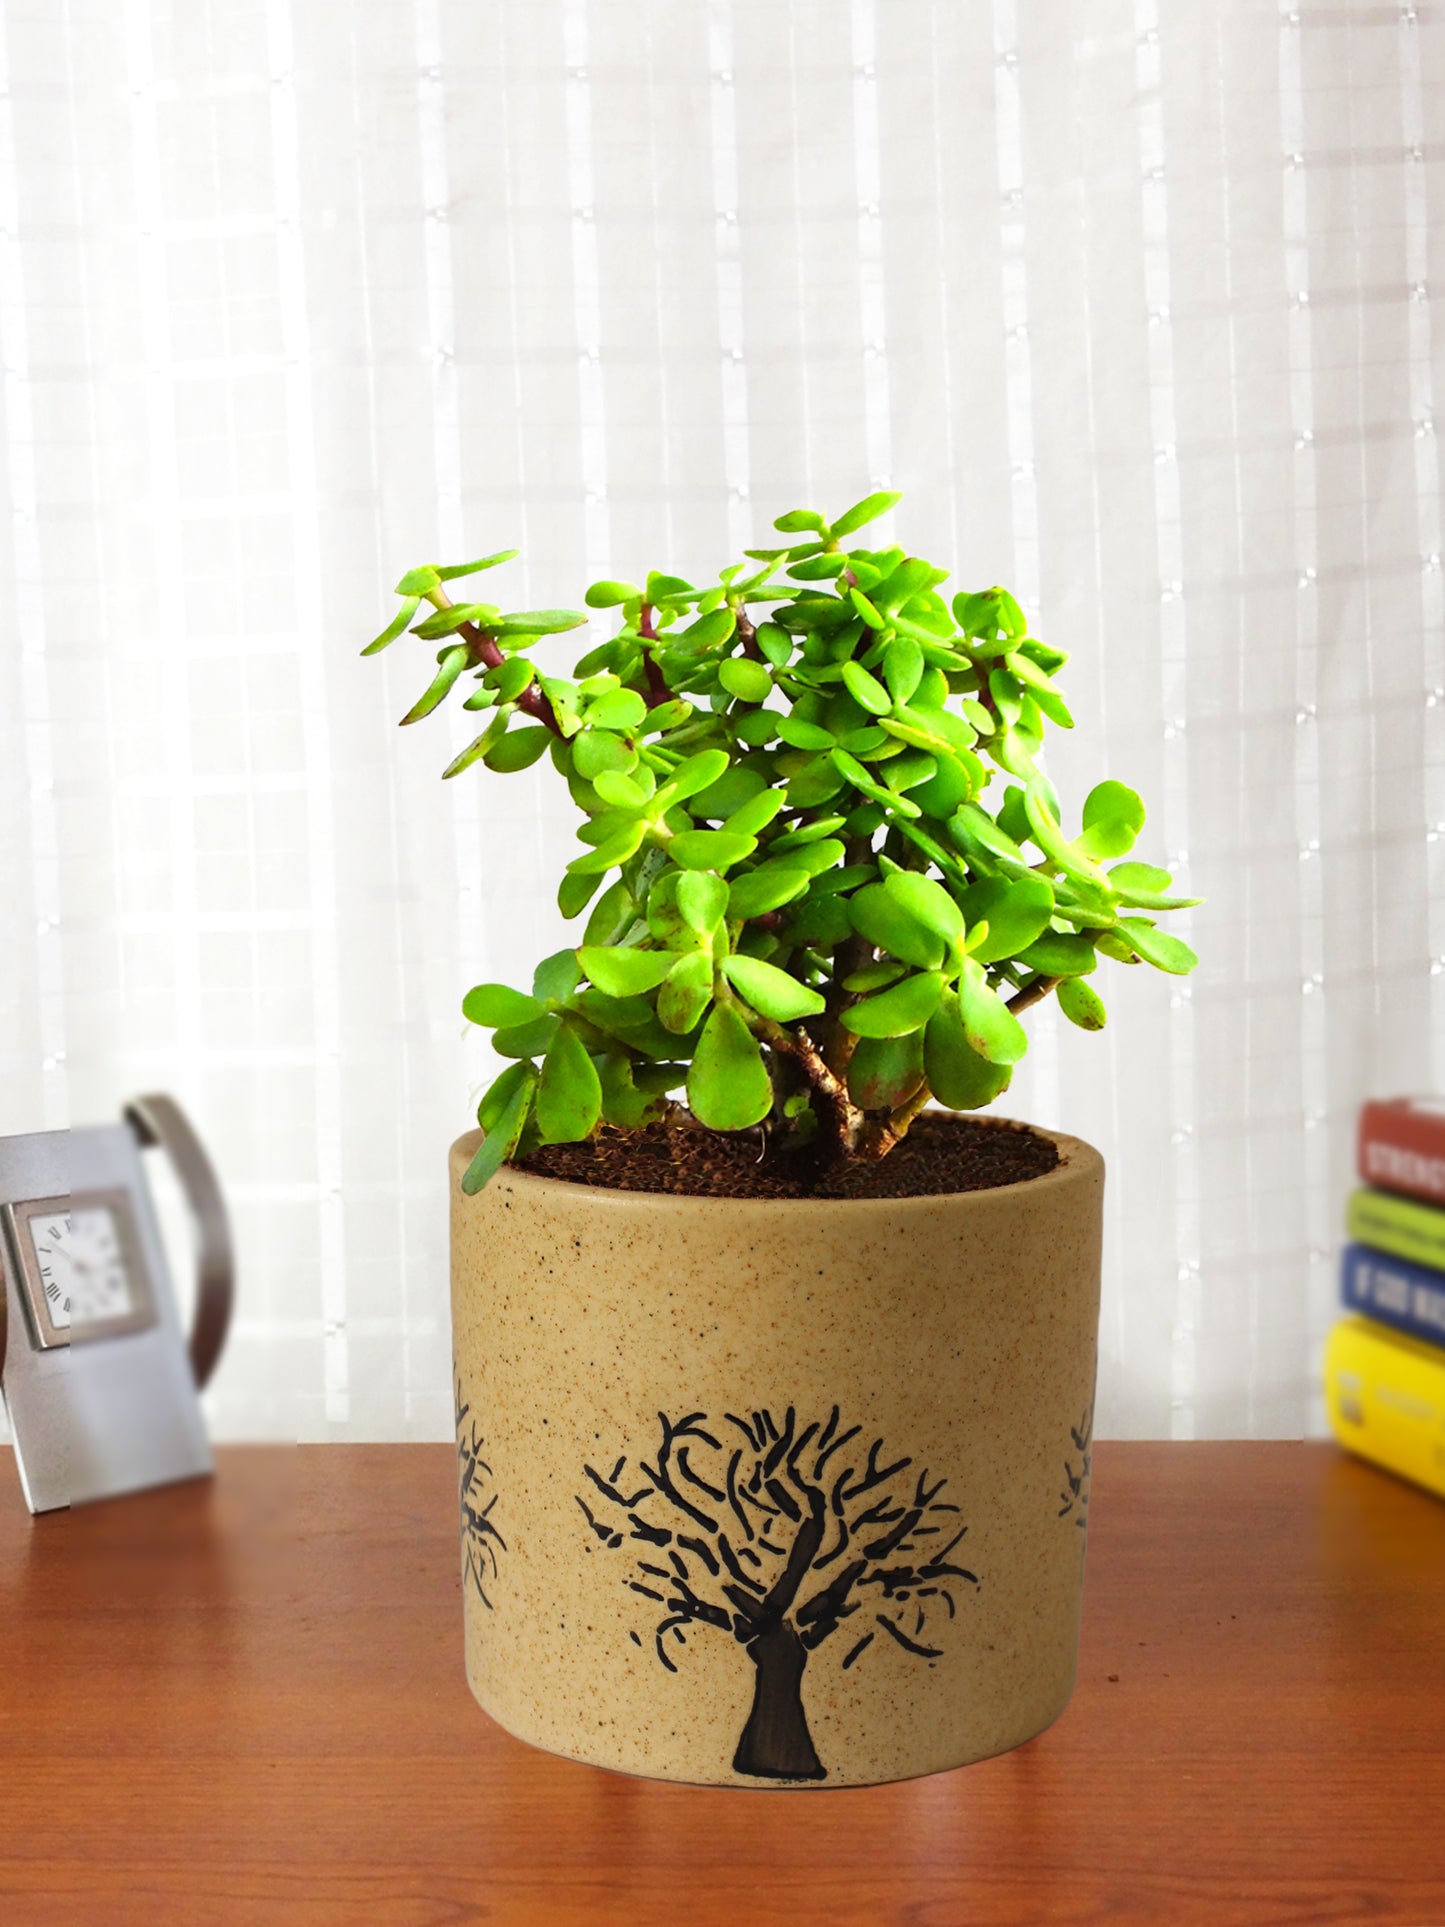 Air Purifying Good Luck Live Natural Plants in Exquisite Ceramic Pots. Best Indoor Plants online in India. Best green gifts for corporate or any occasions. Love plants as gifts. Crassula Jade  quality houseplants shipped all over India.